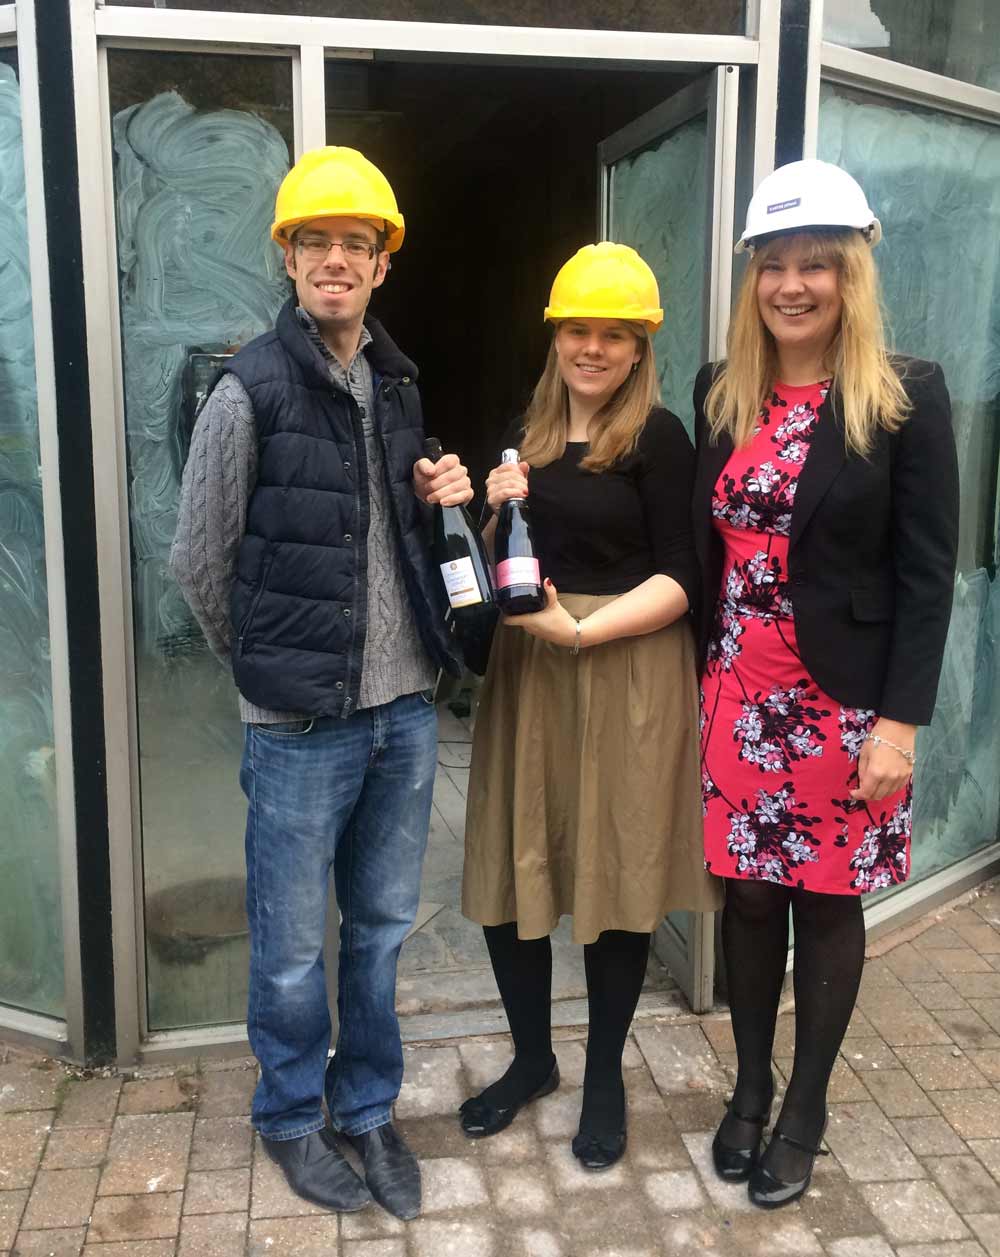 Kim Eastwood of Carter Jonas with Laurence and Gemma Page Connolly of The Champagne Concept